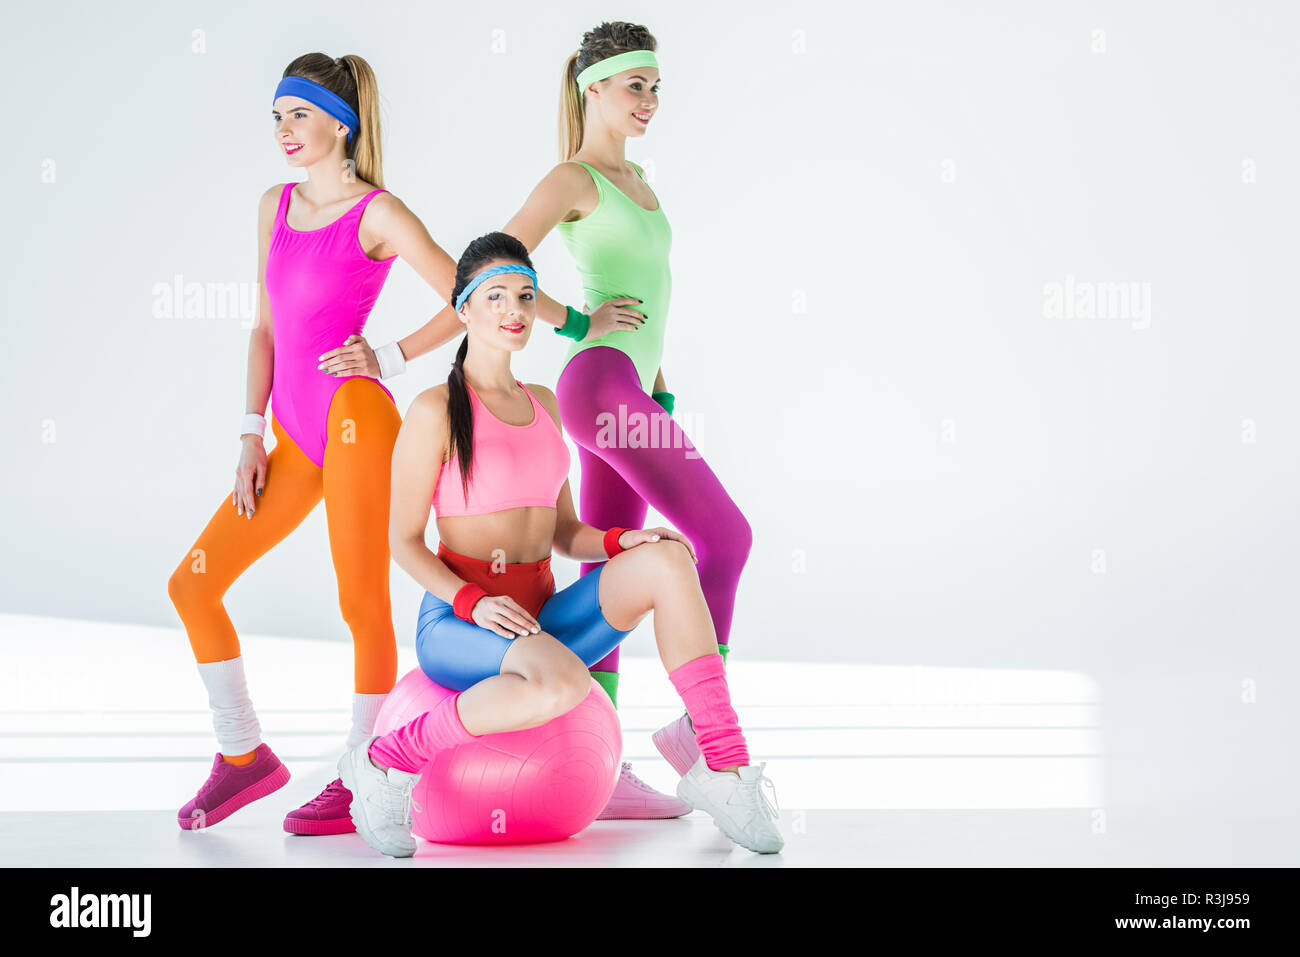 athletic young women in 80s style sportswear posing together on